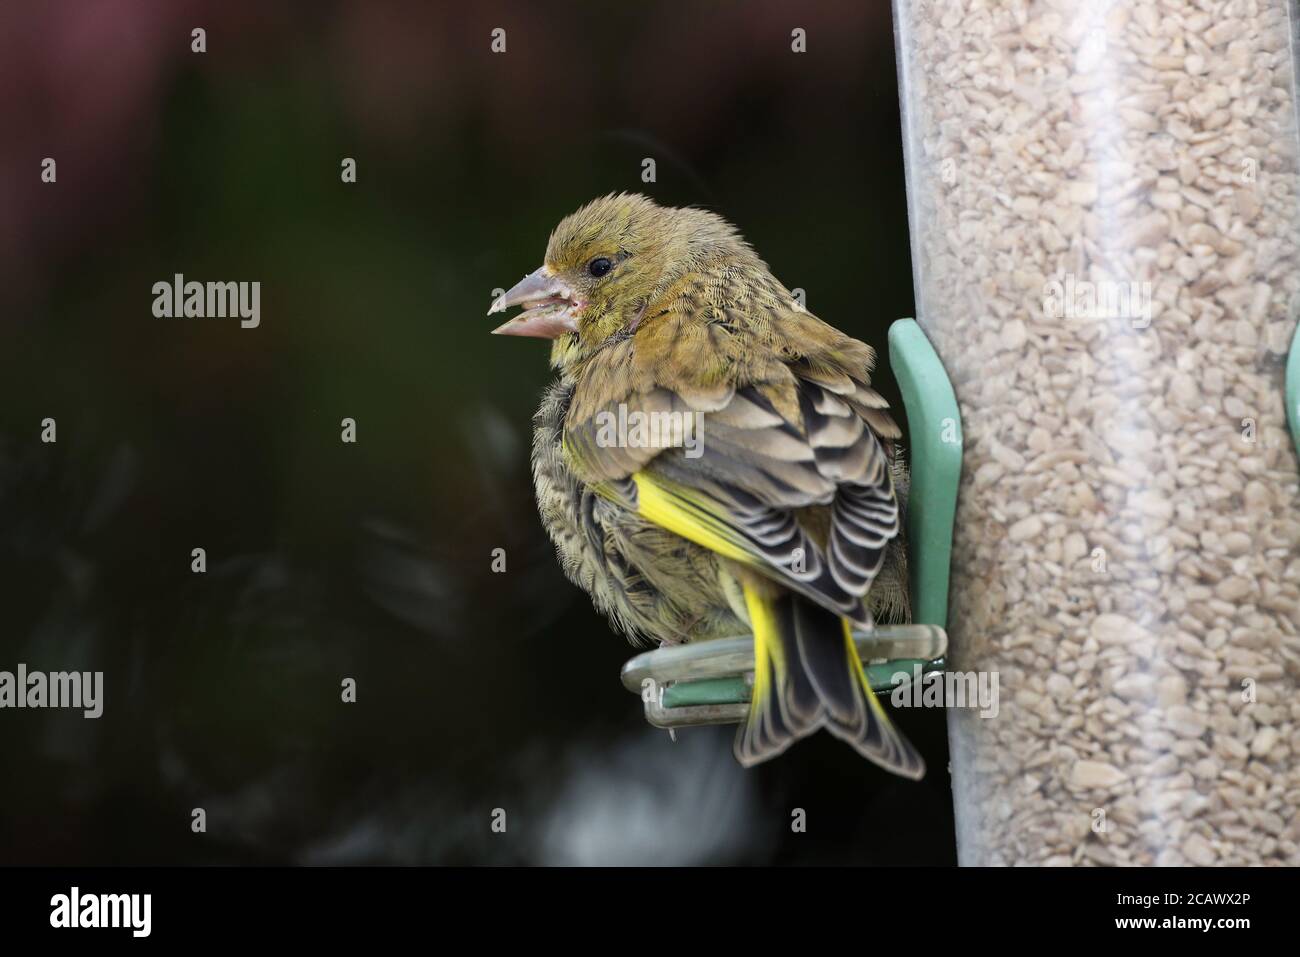 Greenfinch, Carduelis chloride, at a garden feeder, Mid Wales, uk Stock Photo